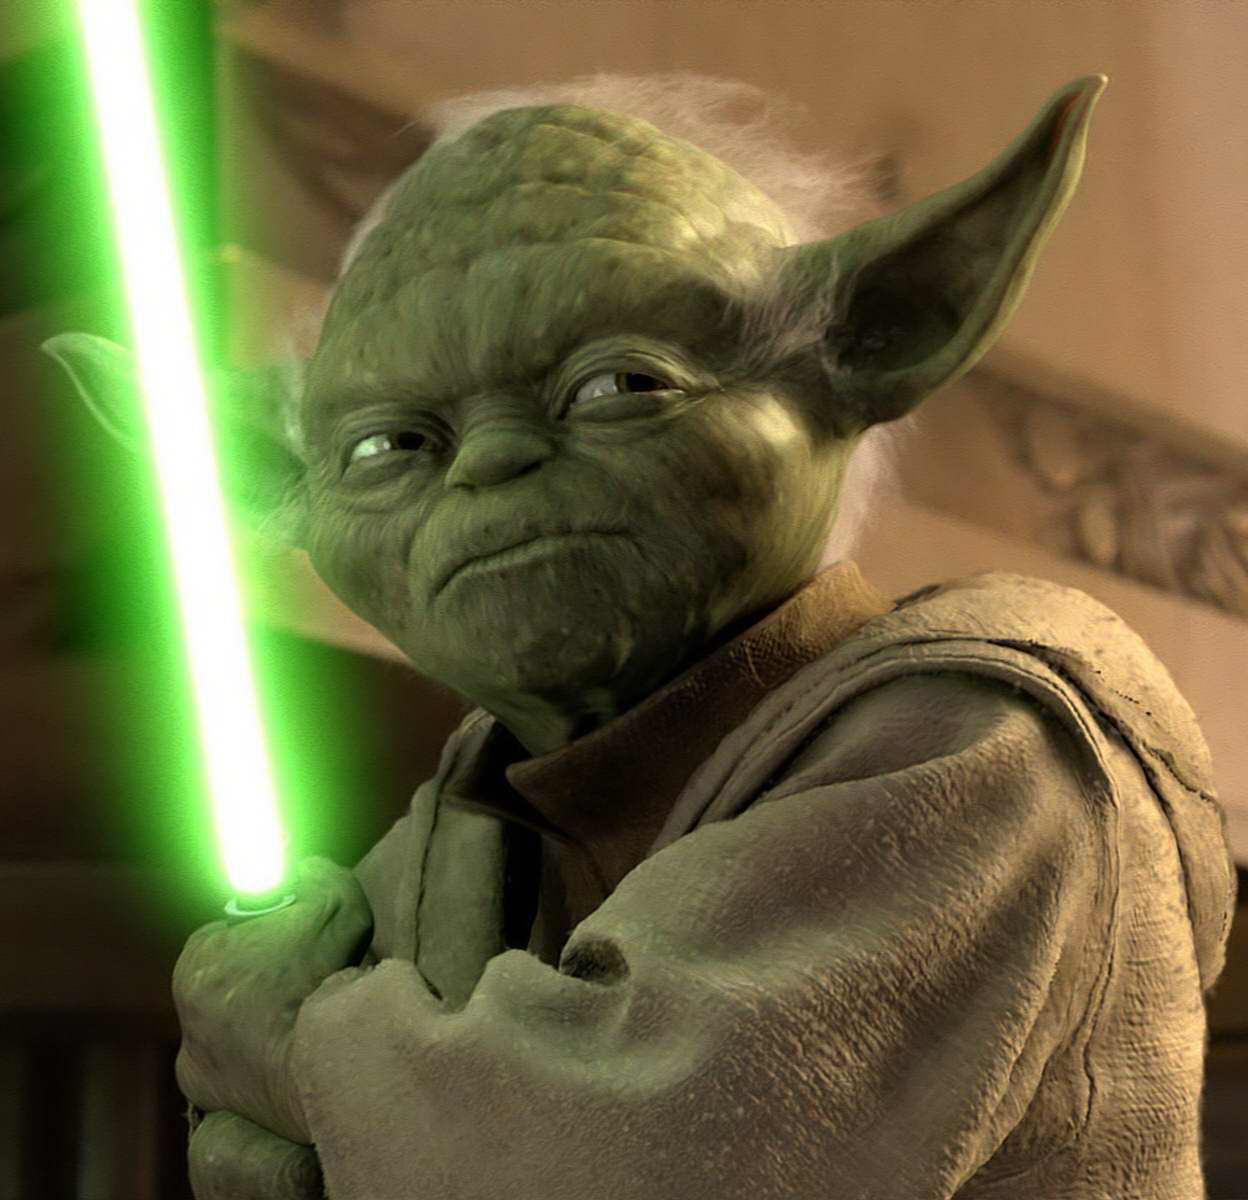 Yoda, "Star Wars" Yedi Master knew Anakin Skywalker killed women and children on 

Tatooine to "avenge" his mother but said nothing. Could have saved all those children... you green prick.